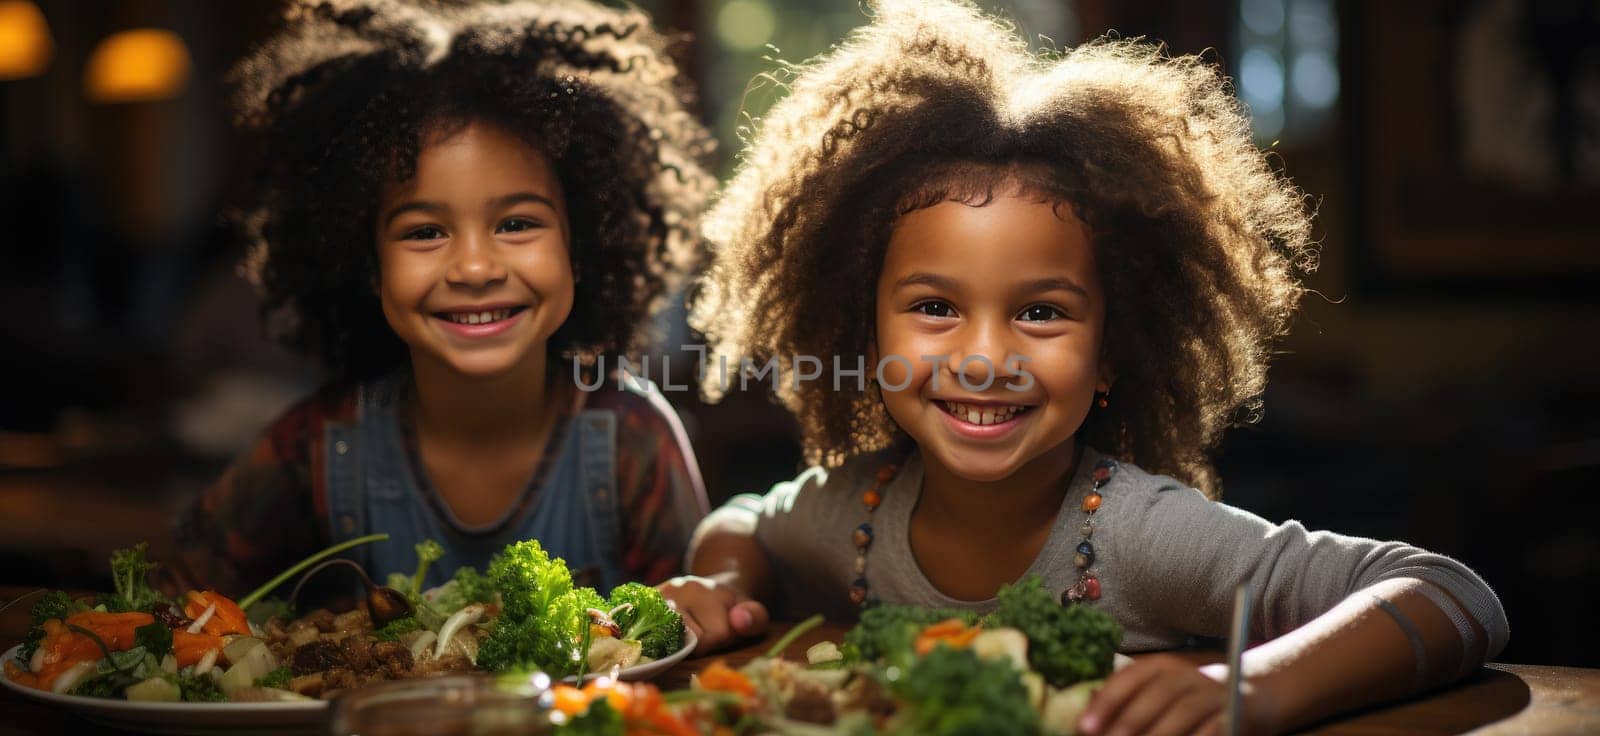 Healthy food and smiling children create a fun and joyful atmosphere at the dinner table